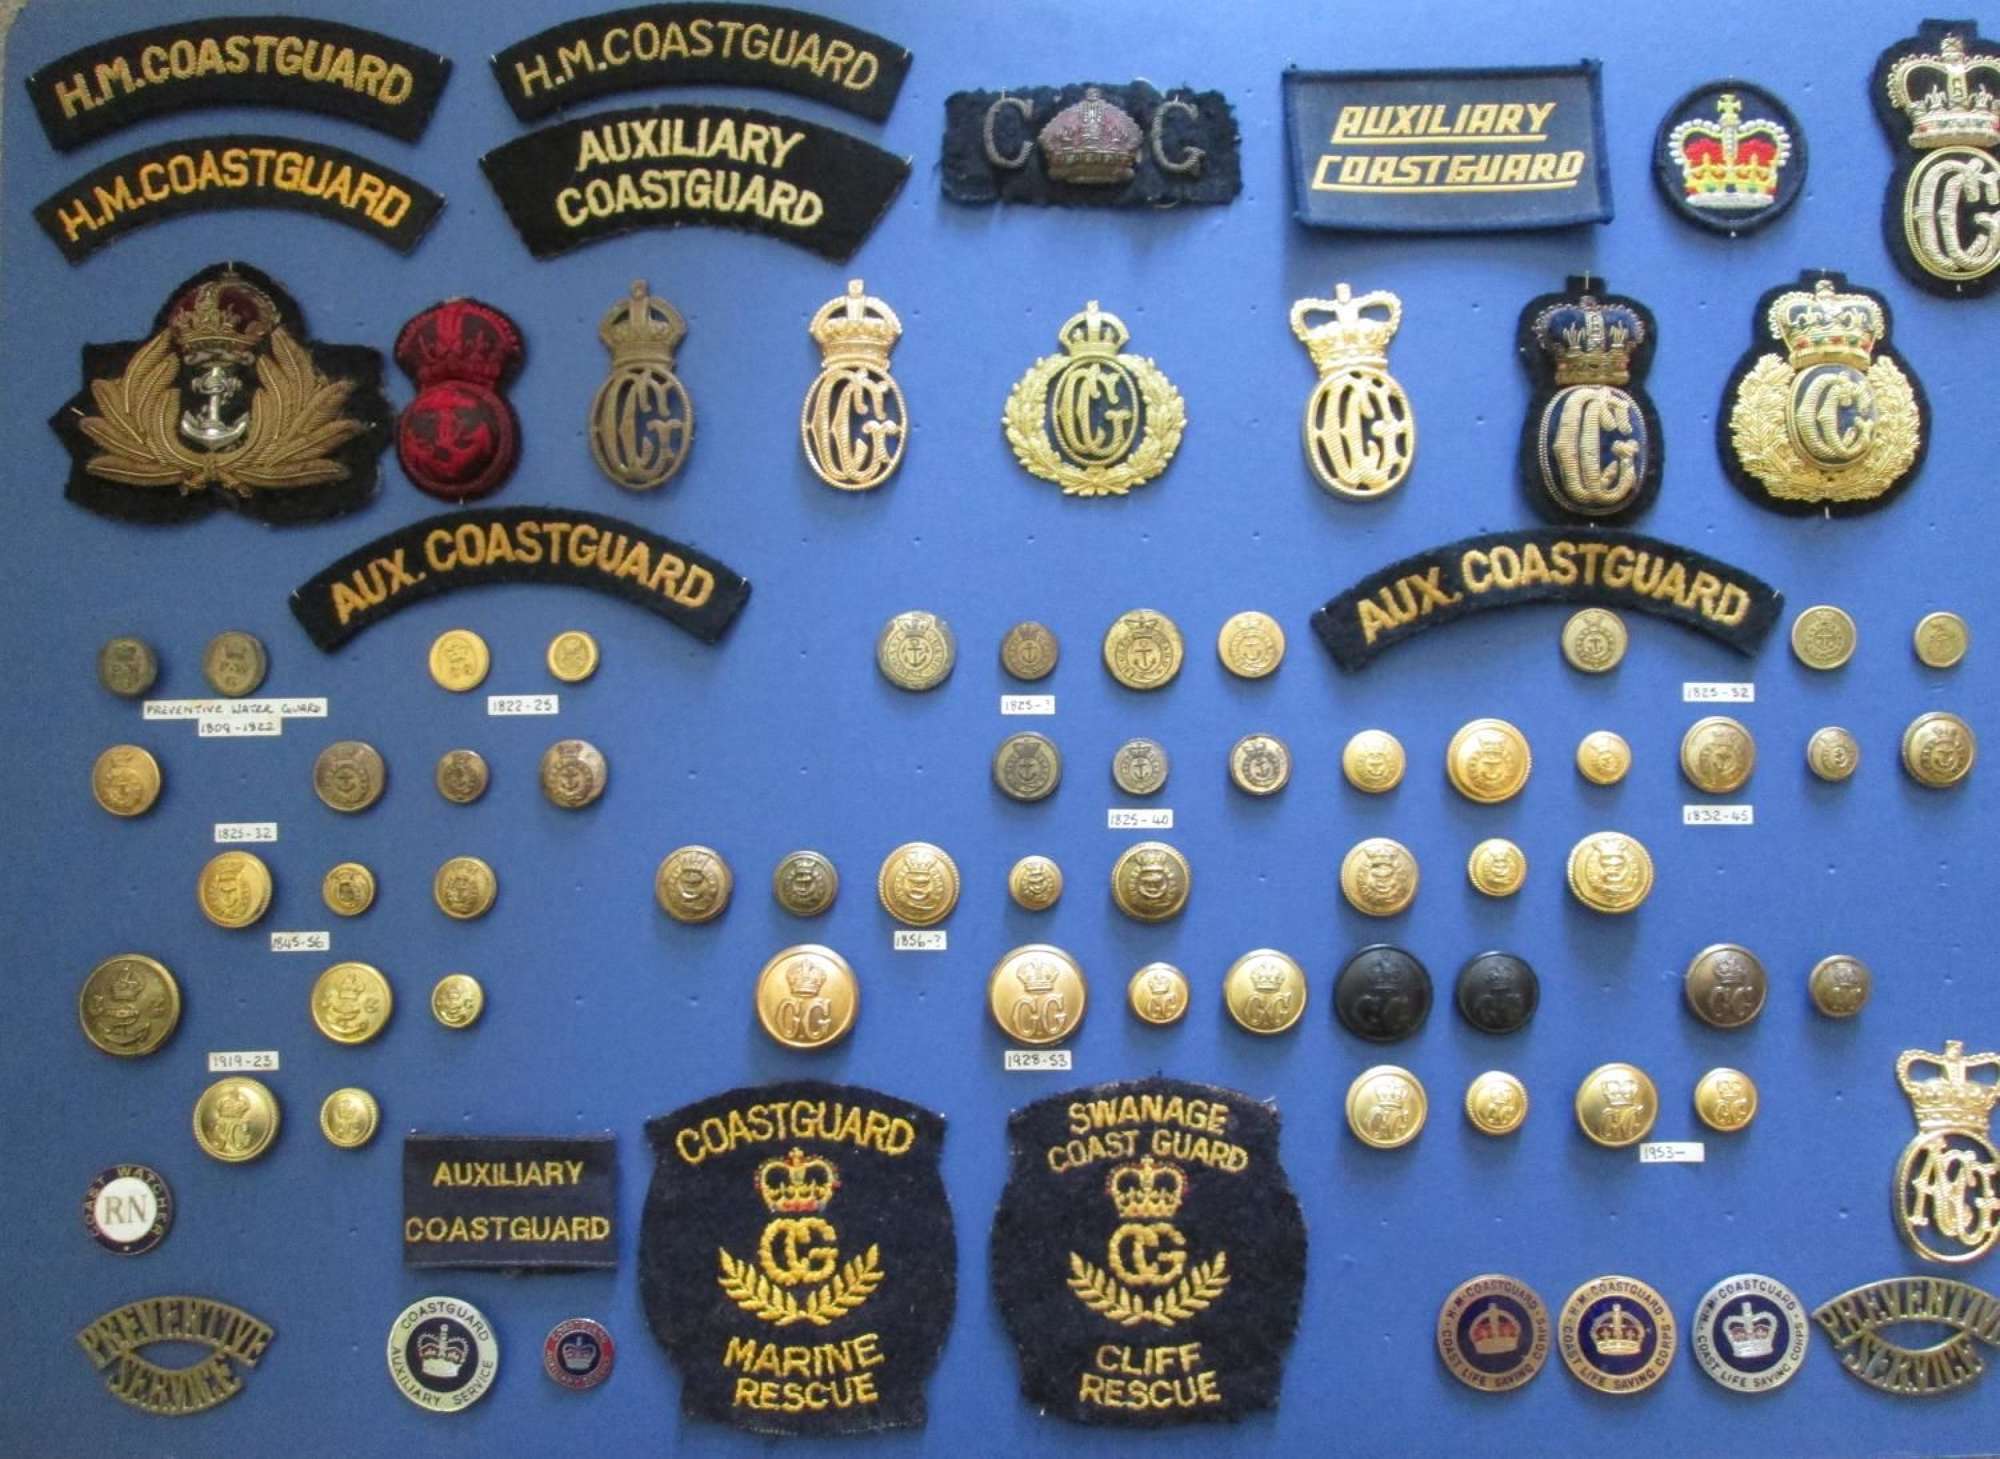 A COLLECTION OF H M COAST GUARD BADGES AND BUTTONS